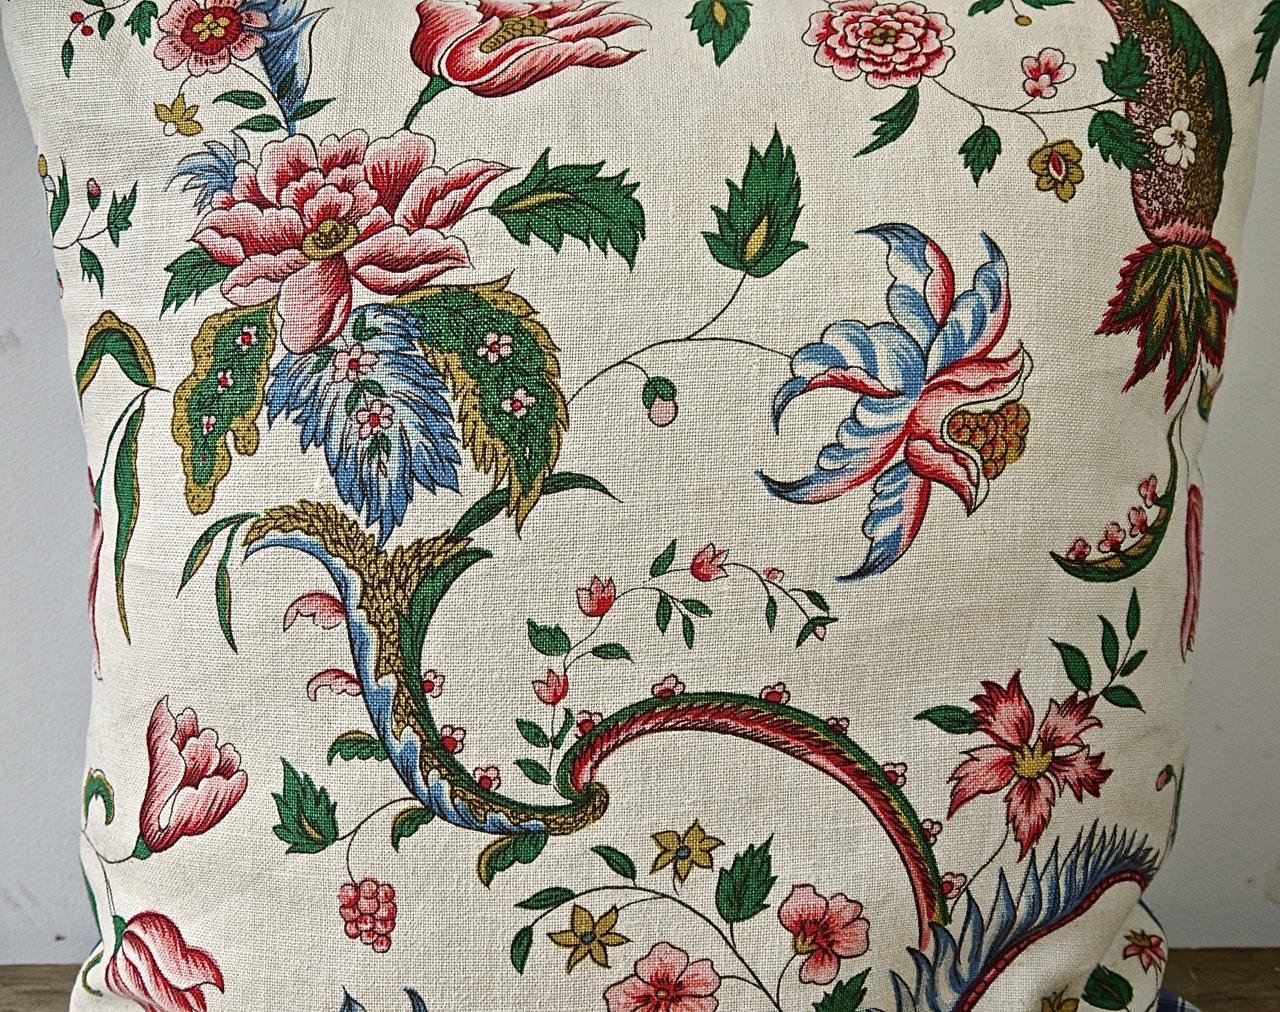 Mid 20th century, French hand printed linen cushion with a large scale design of stylized exotic flowers and leaves in raspberry red and pink and blues on meandering branches.Backed in a 19th century French blue and white cotton check and